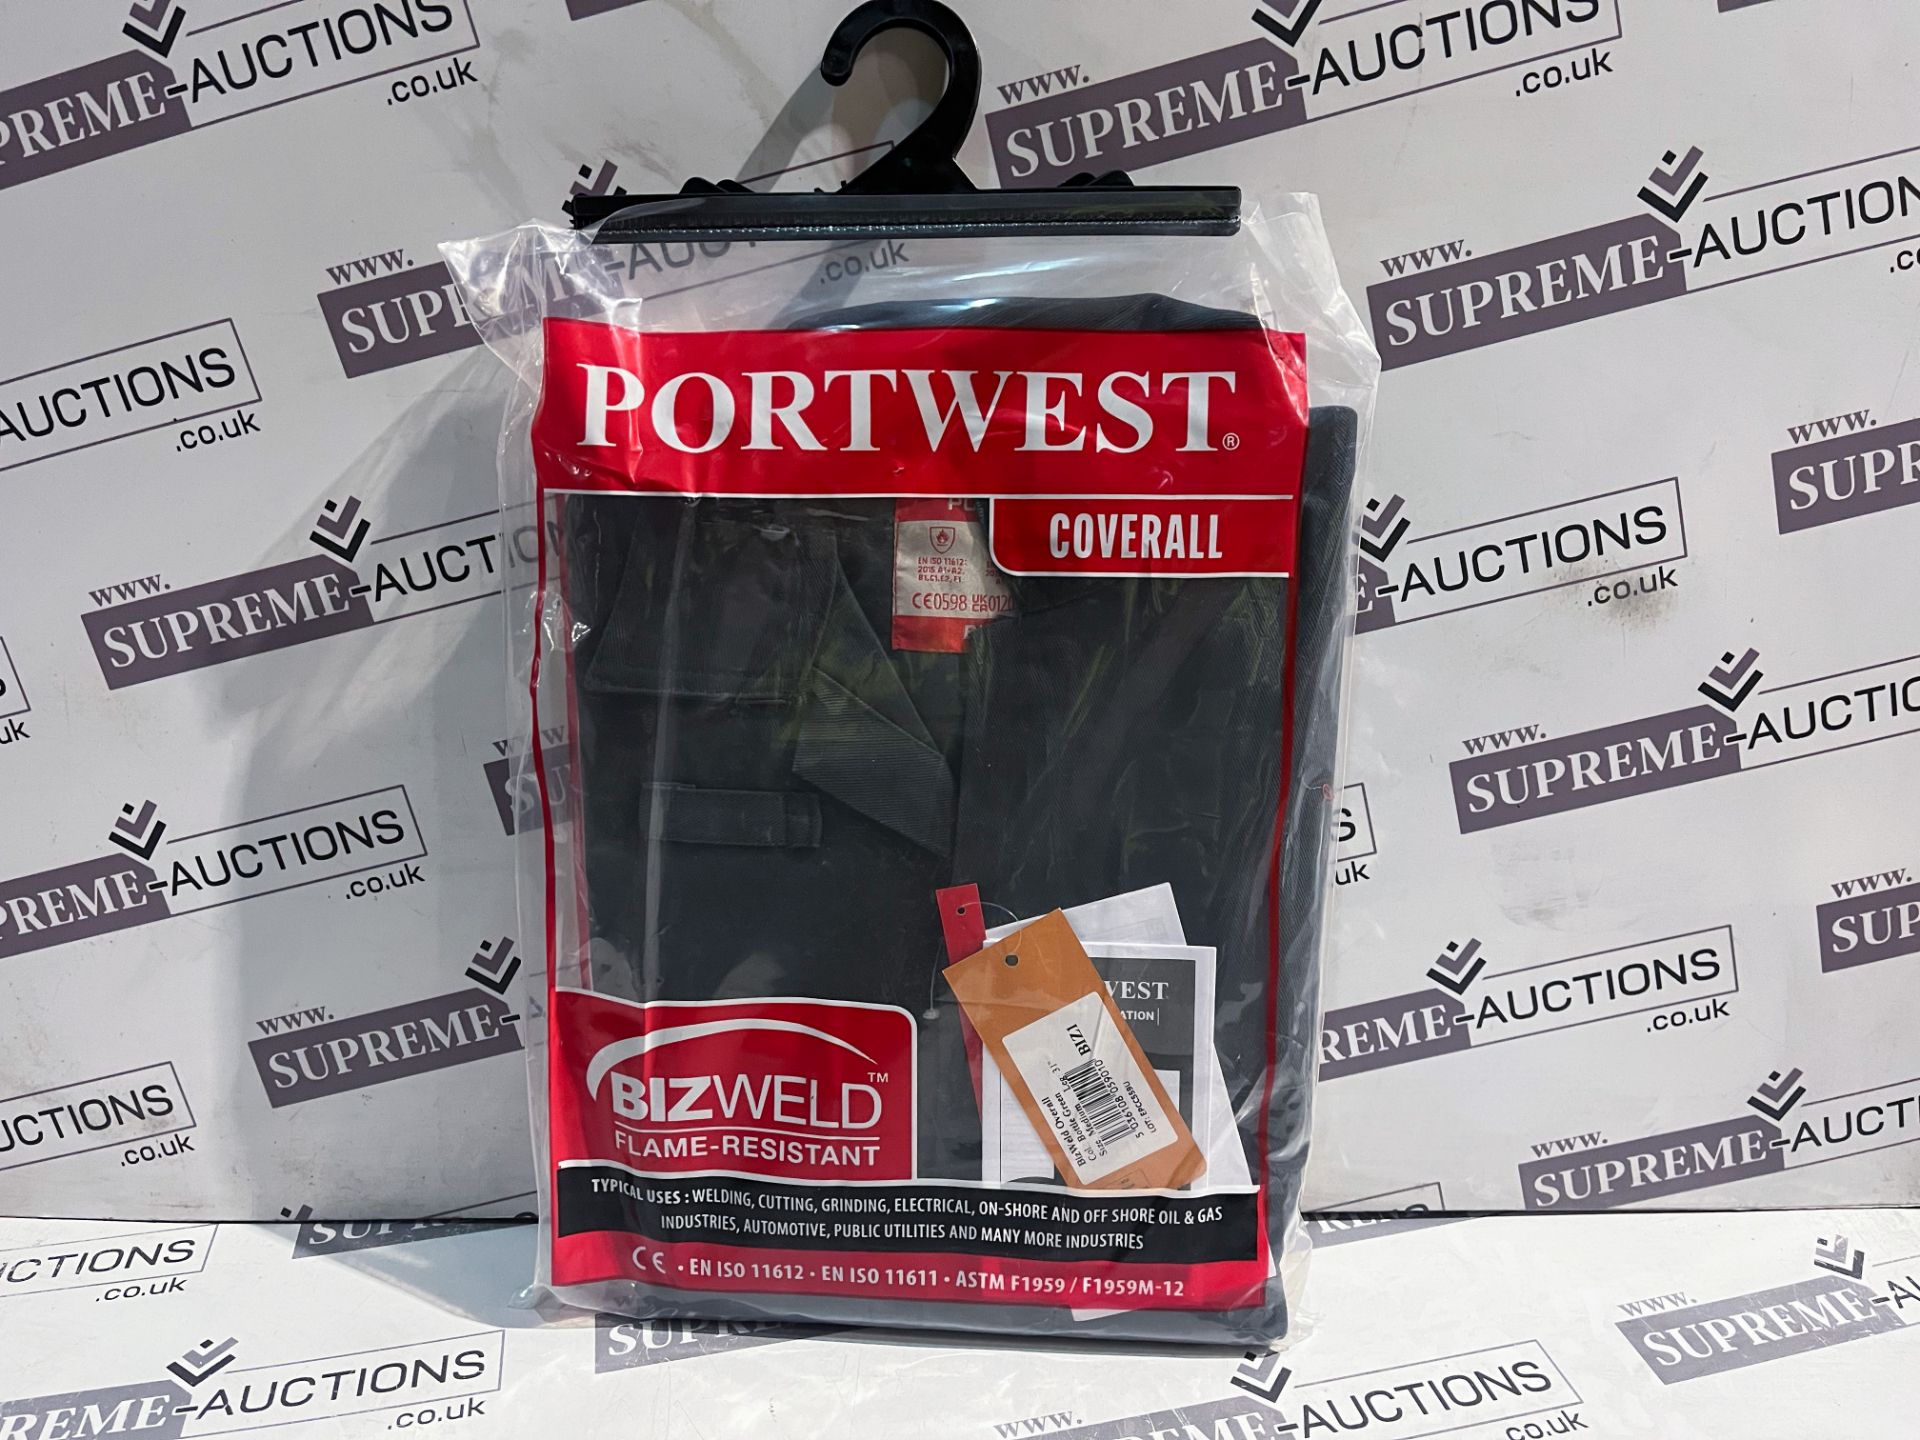 11 X BRAND NEW PORTWEST BIZWELD FLAME RESISTANT COVERALLS SIZE MEDIUM R13-15